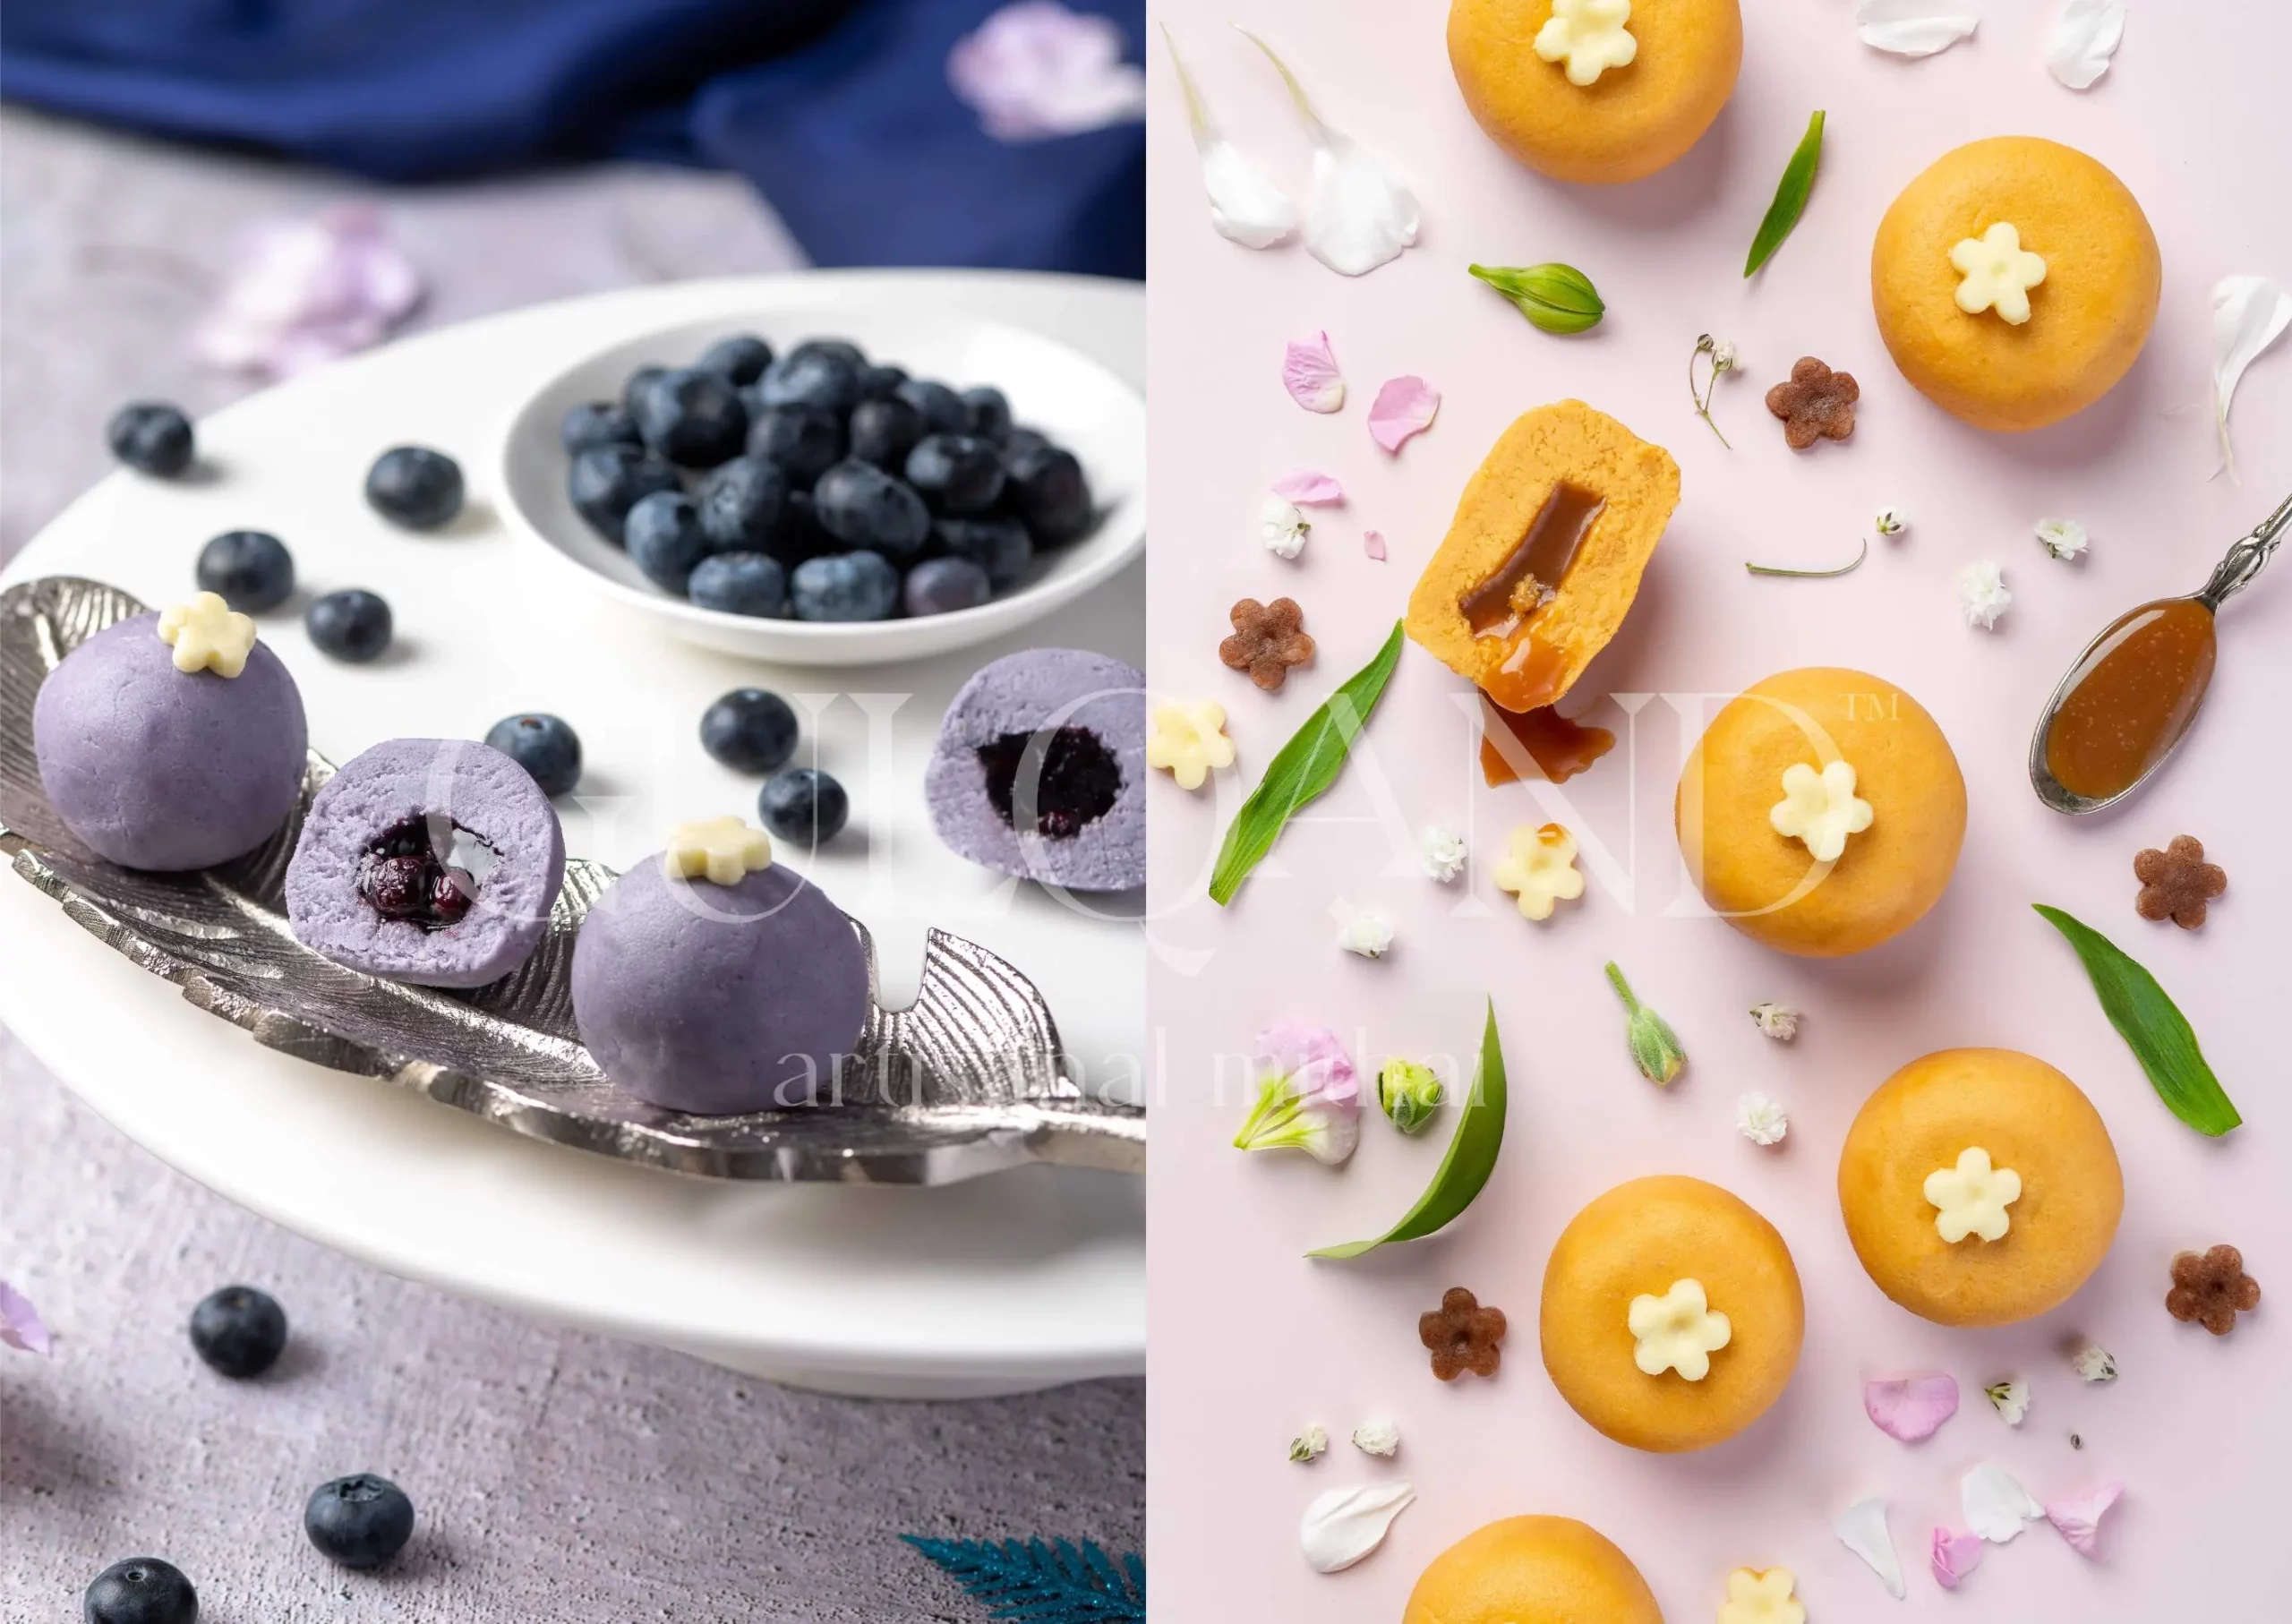 Two pictures of desserts with blueberries and peaches.